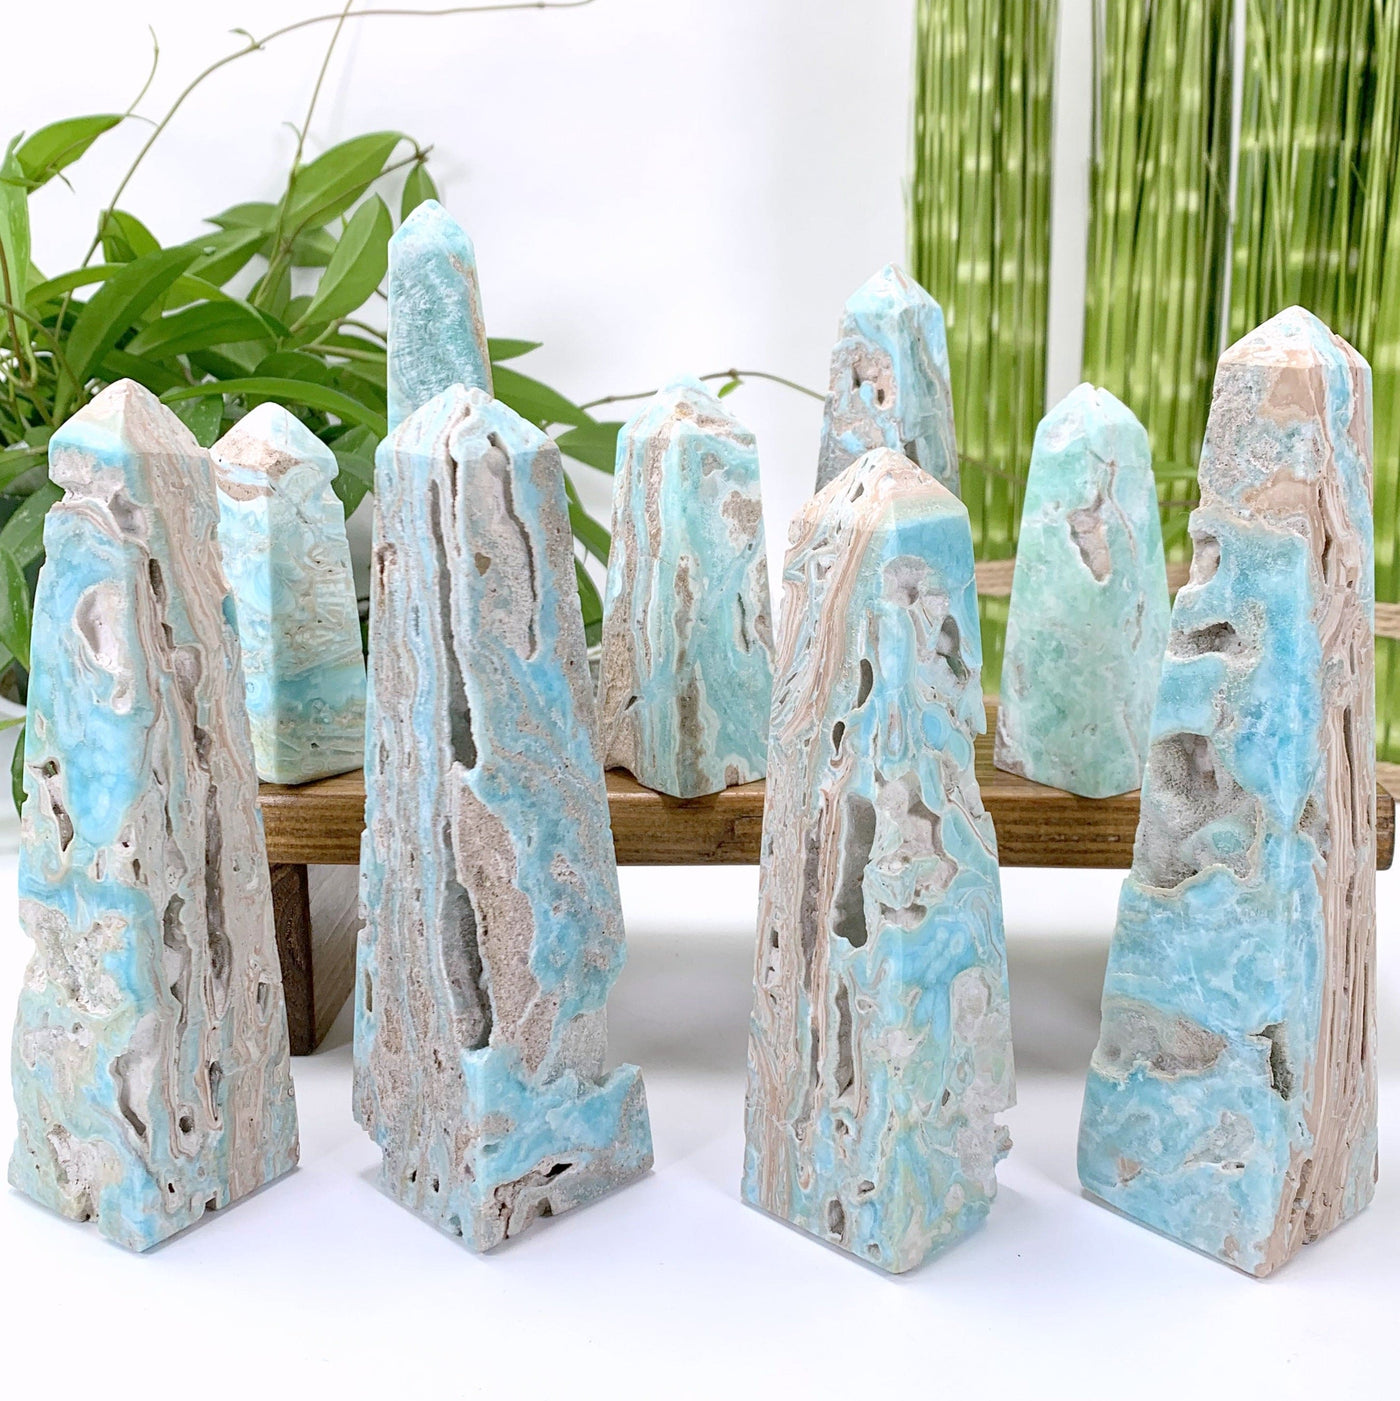 10 obelisks sitting on a wood stand with a white background